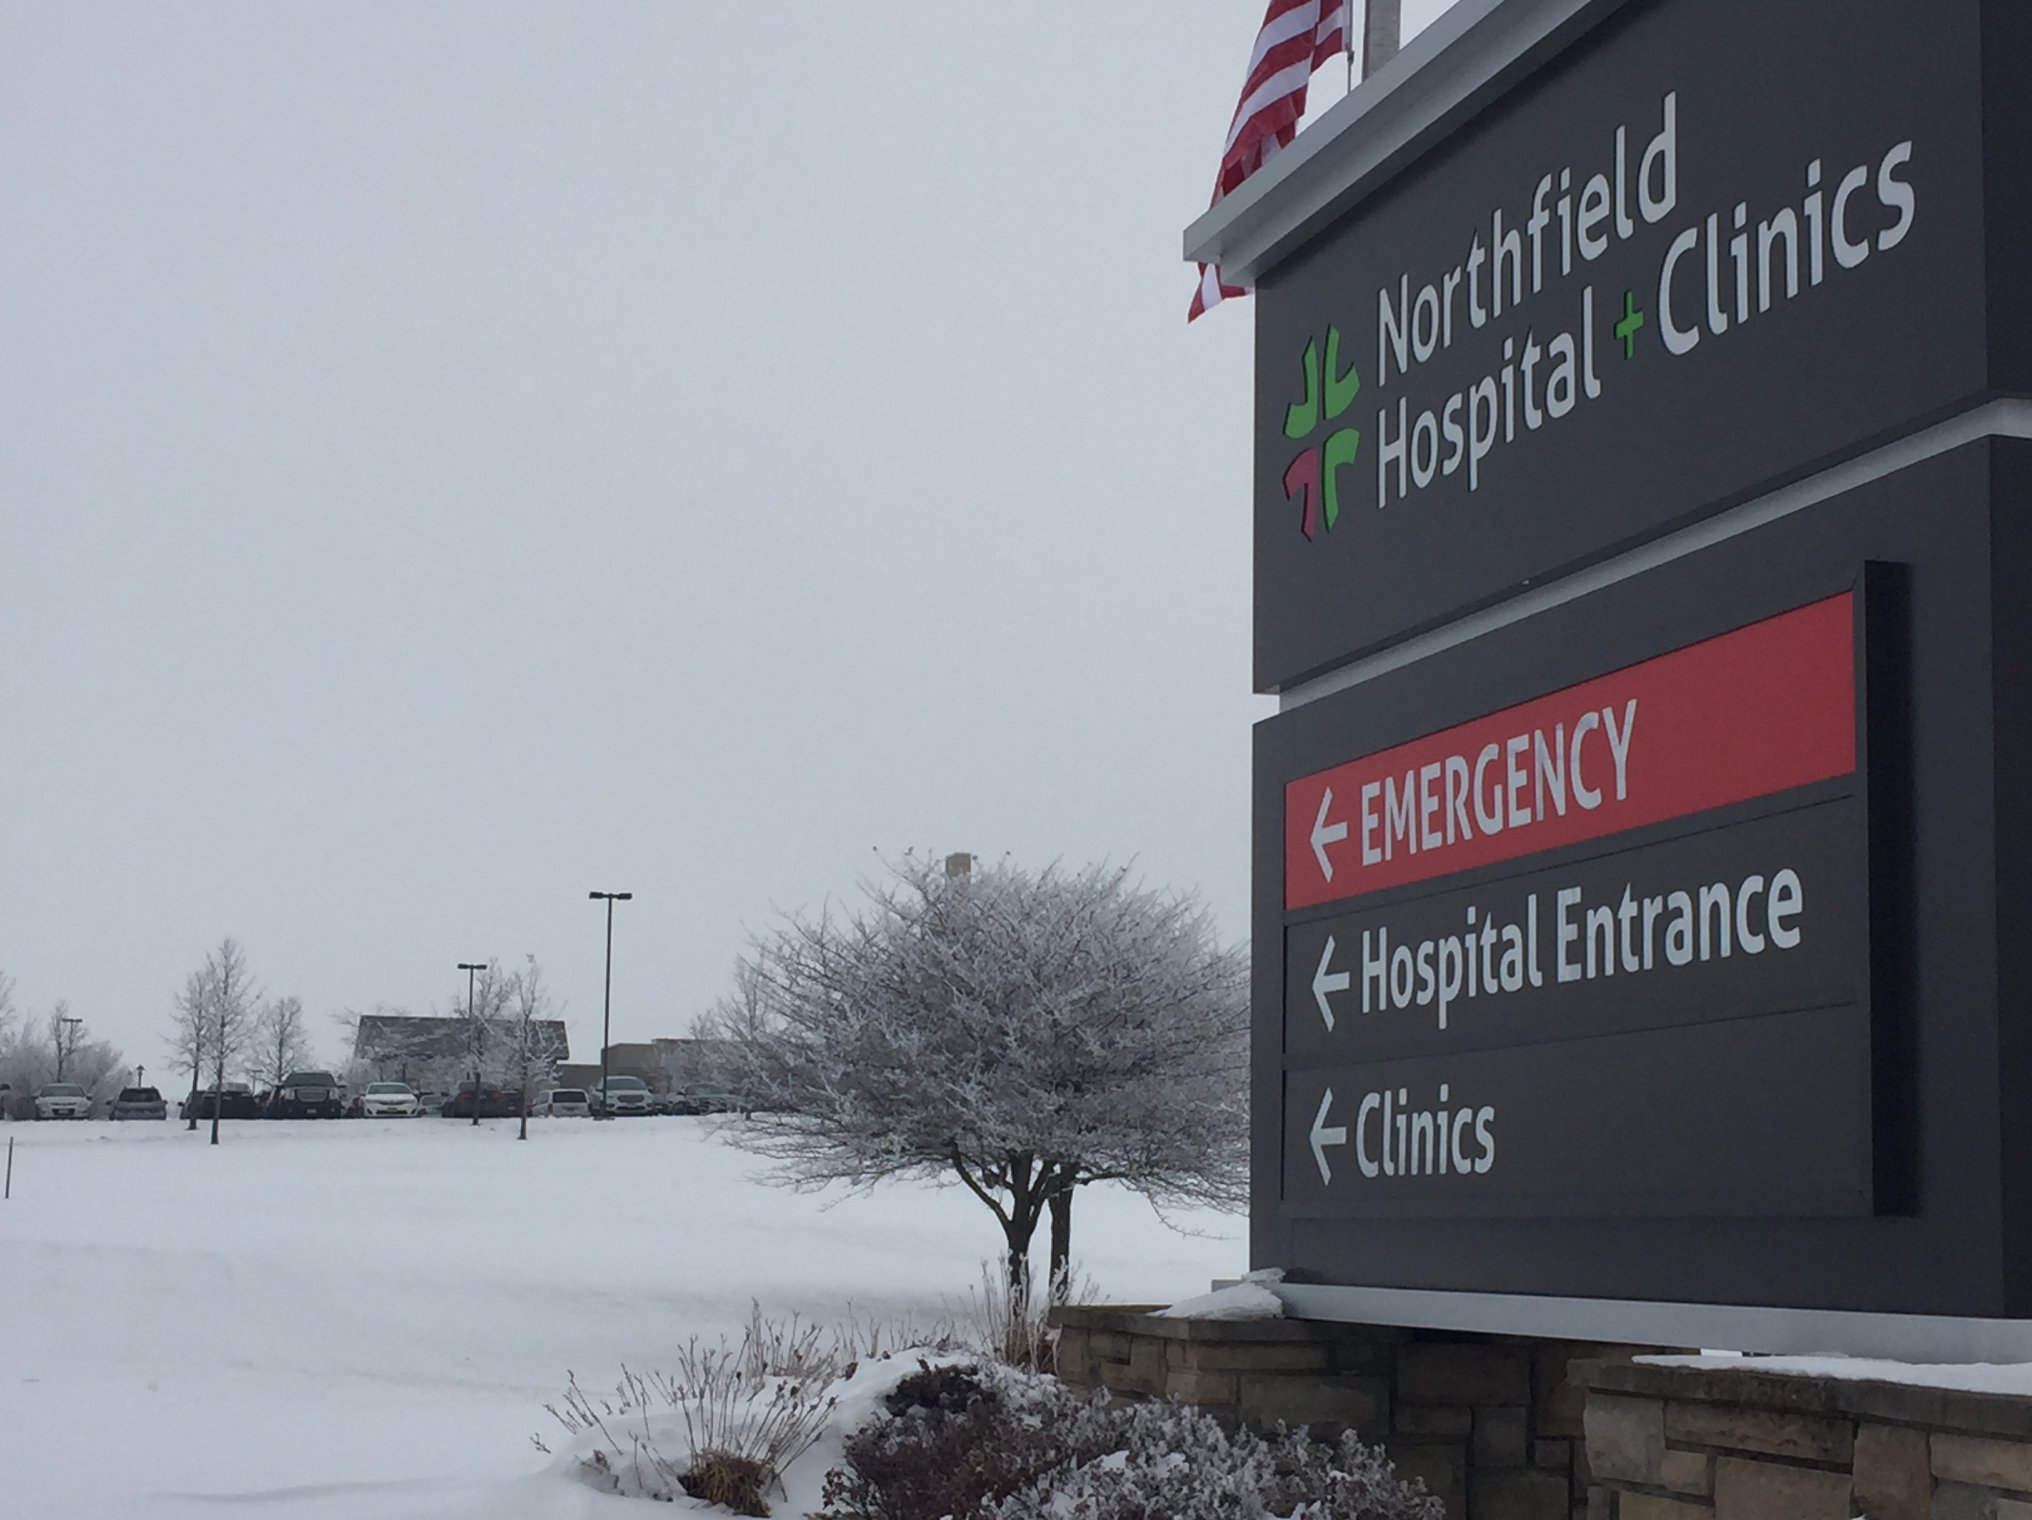 Northfield Hospital + Clinics allows some visitors under age 18